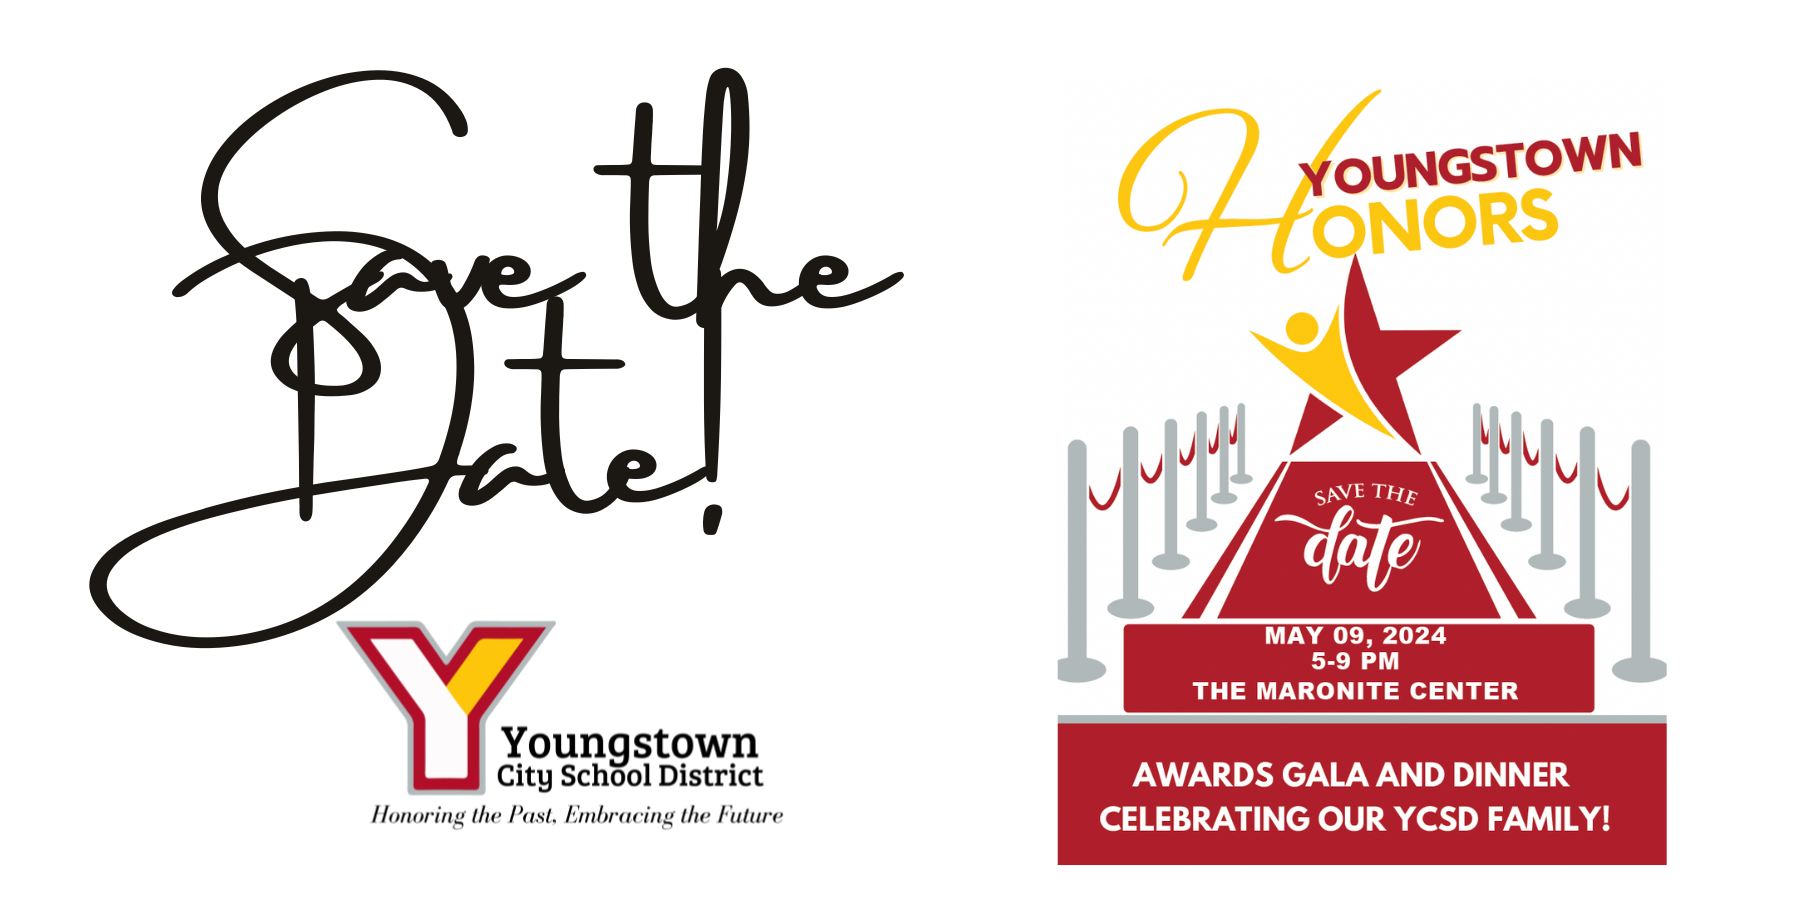 Youngstown Honors graphic